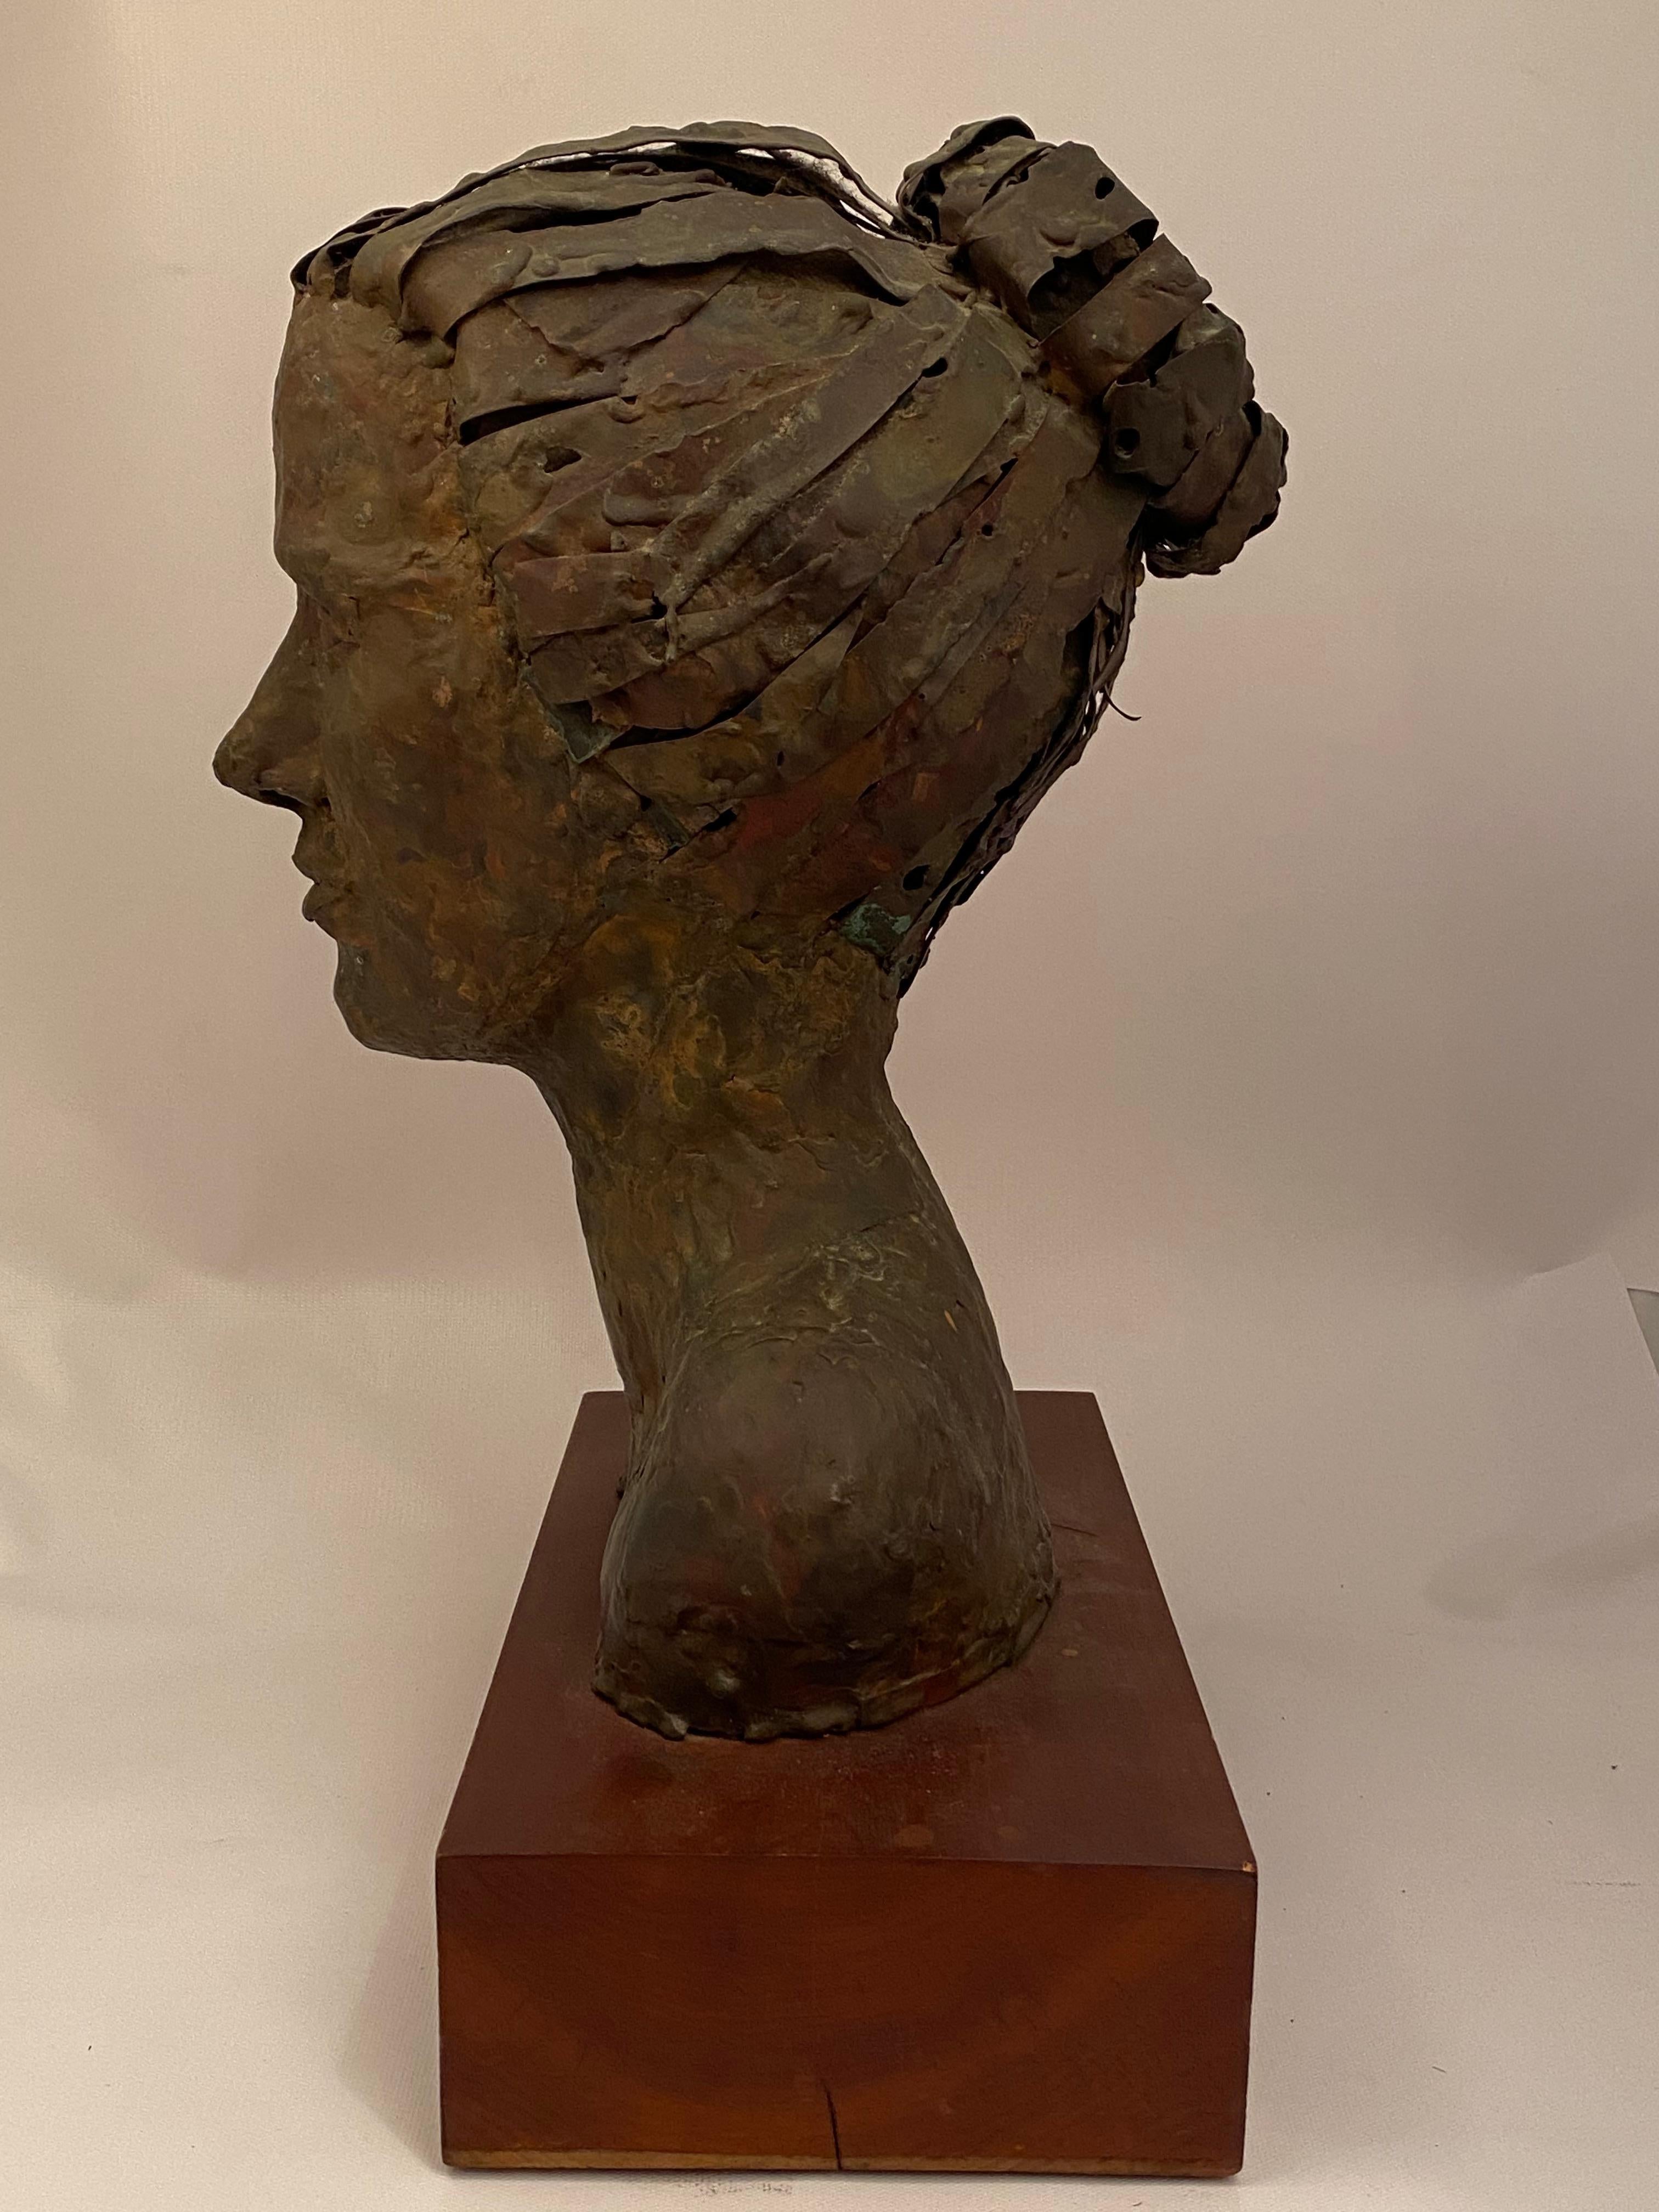 A wonderful copper portrait bust sculpture resting on a walnut base. Signed on the underside of base, R. Kennedy, 1961. Good overall condition. Wear commensurate with age and use. Overall dark patina and some verdi gris oxidation. Measures: